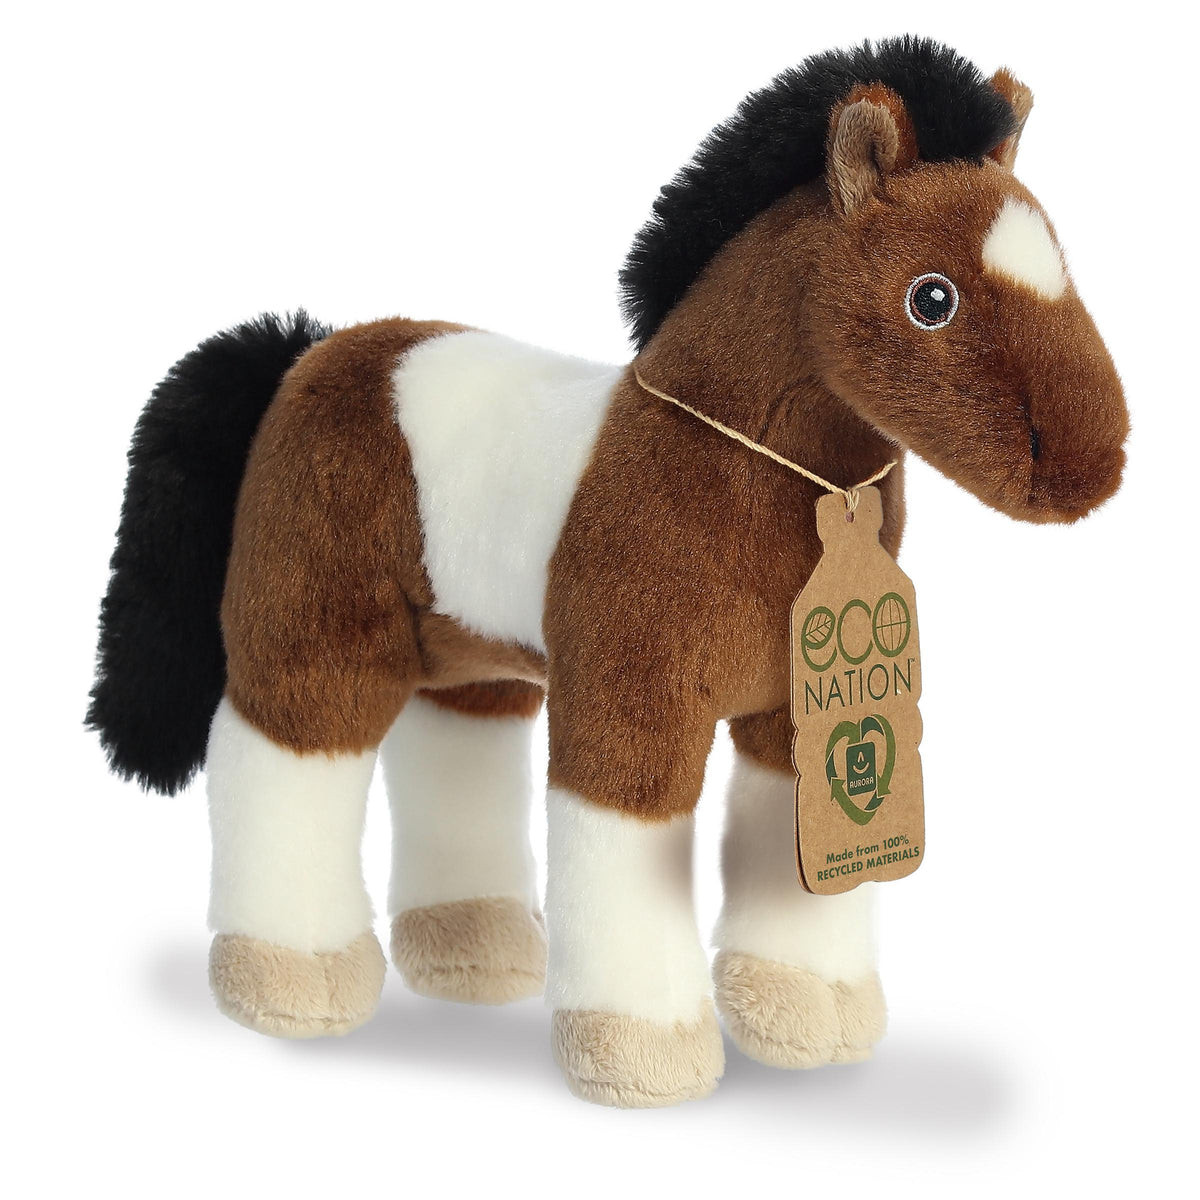 Endearing paint horse plush with a brown and white coat, detailed embroidered eyes, and an eco-nation tag